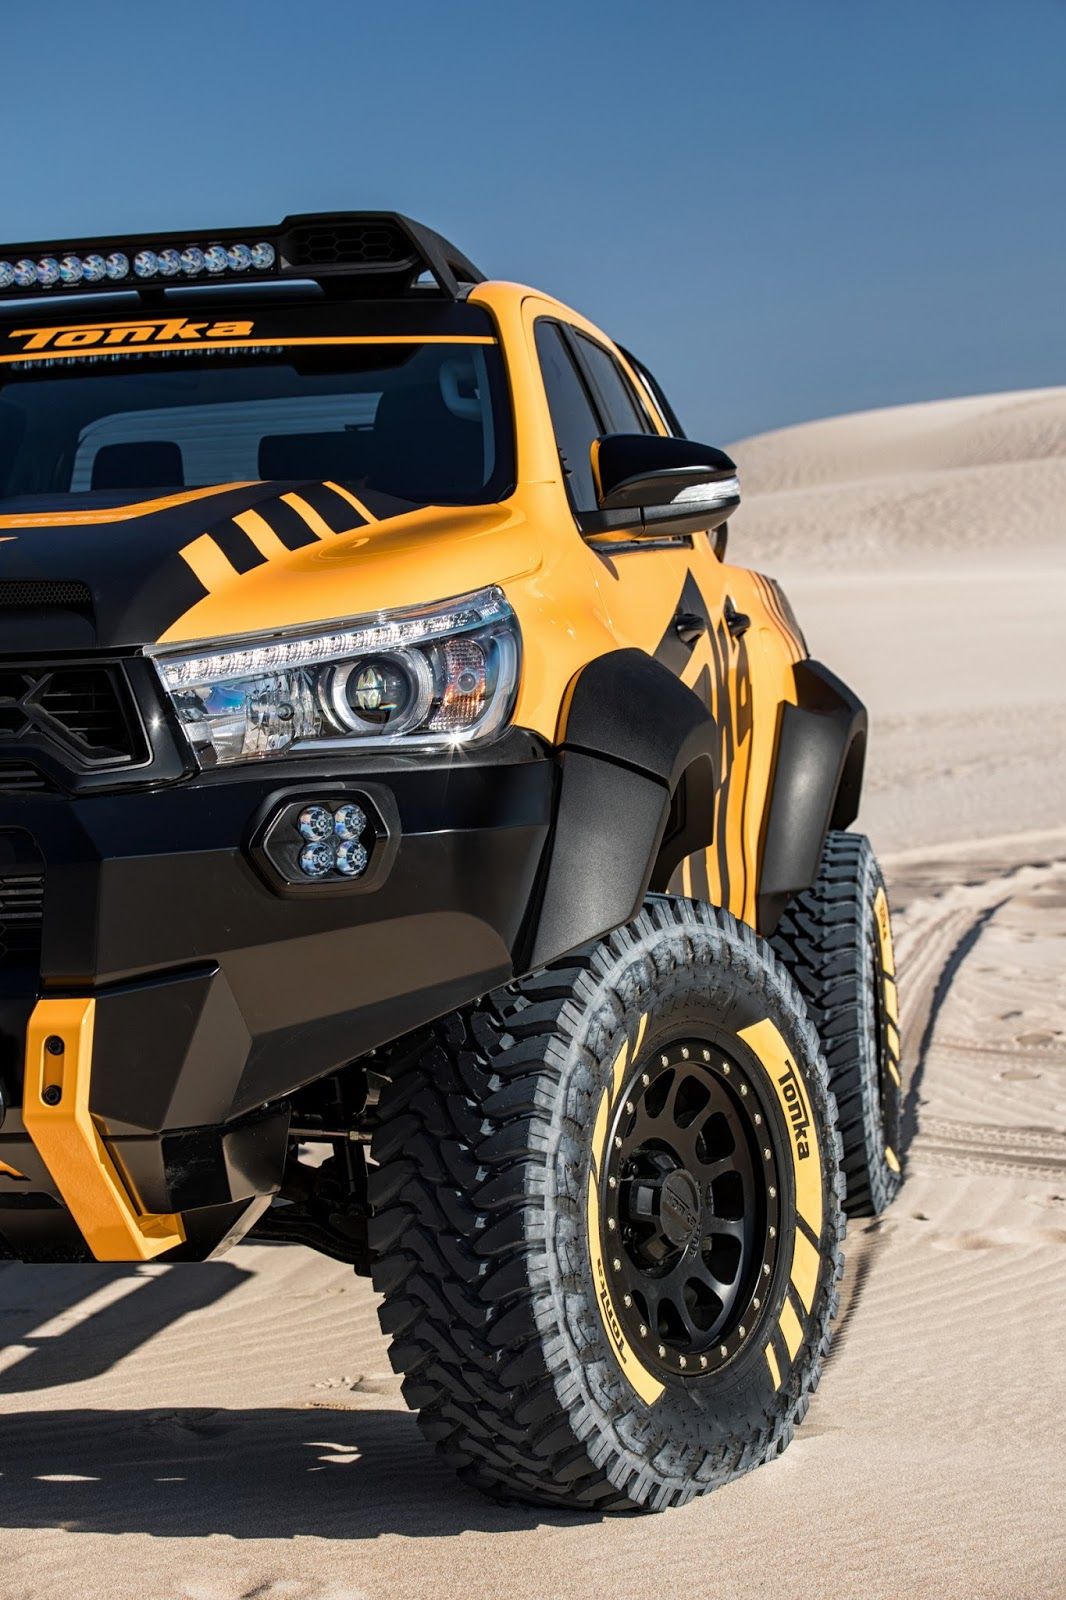 Toyota Hilux Tonka Concept Is A Dream Toy For Adults Carscoops